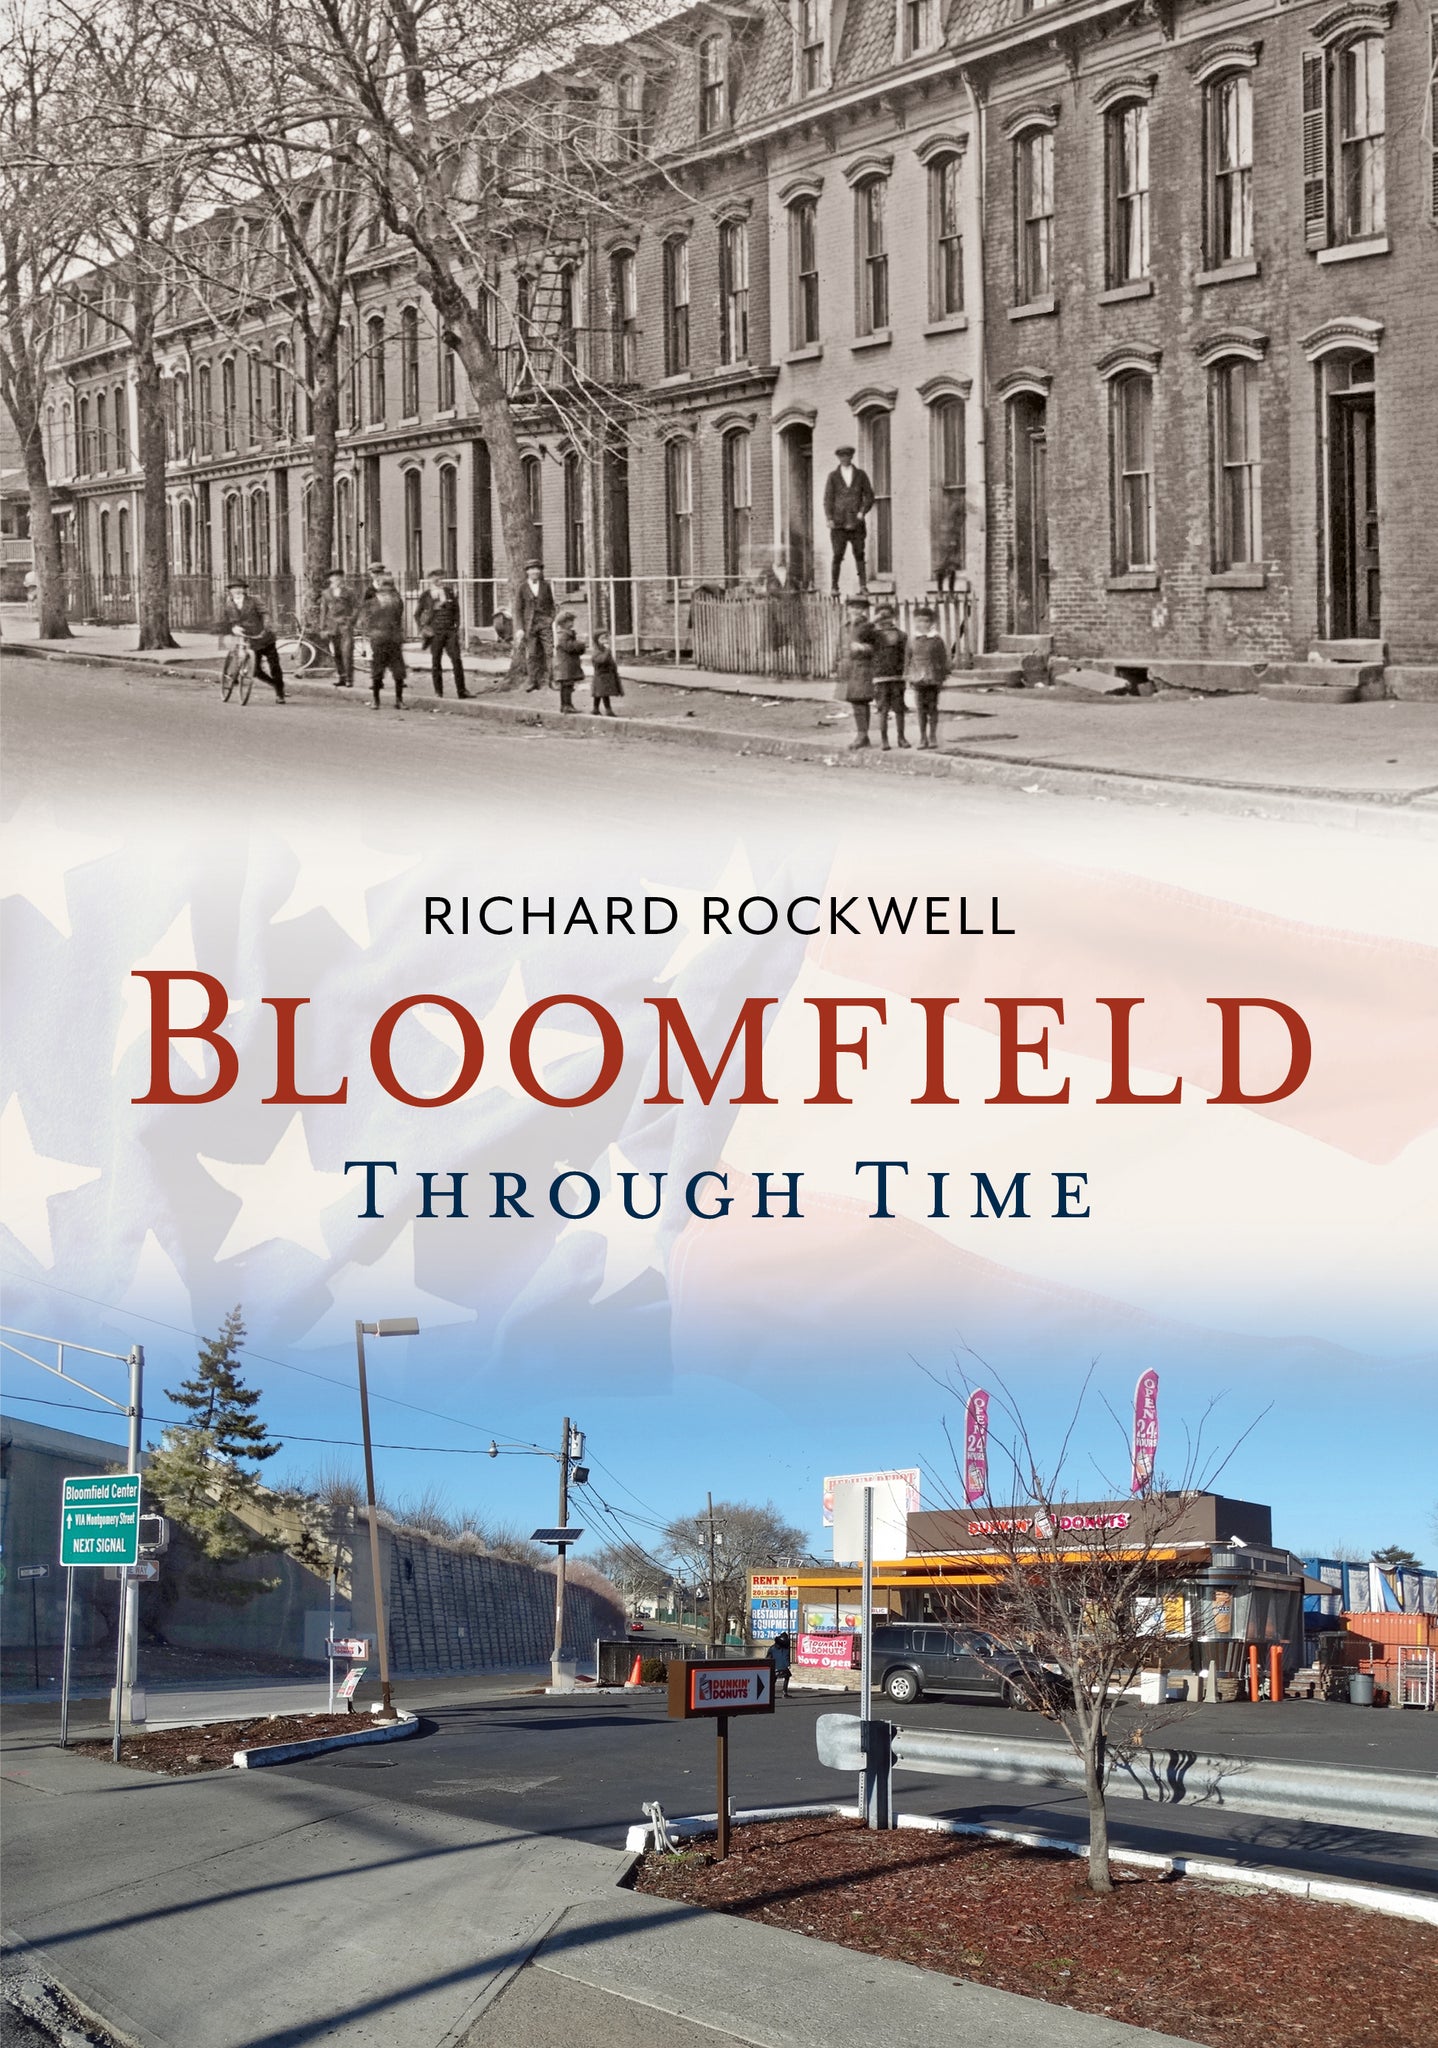 Bloomfield Through Time - published by America Through Time